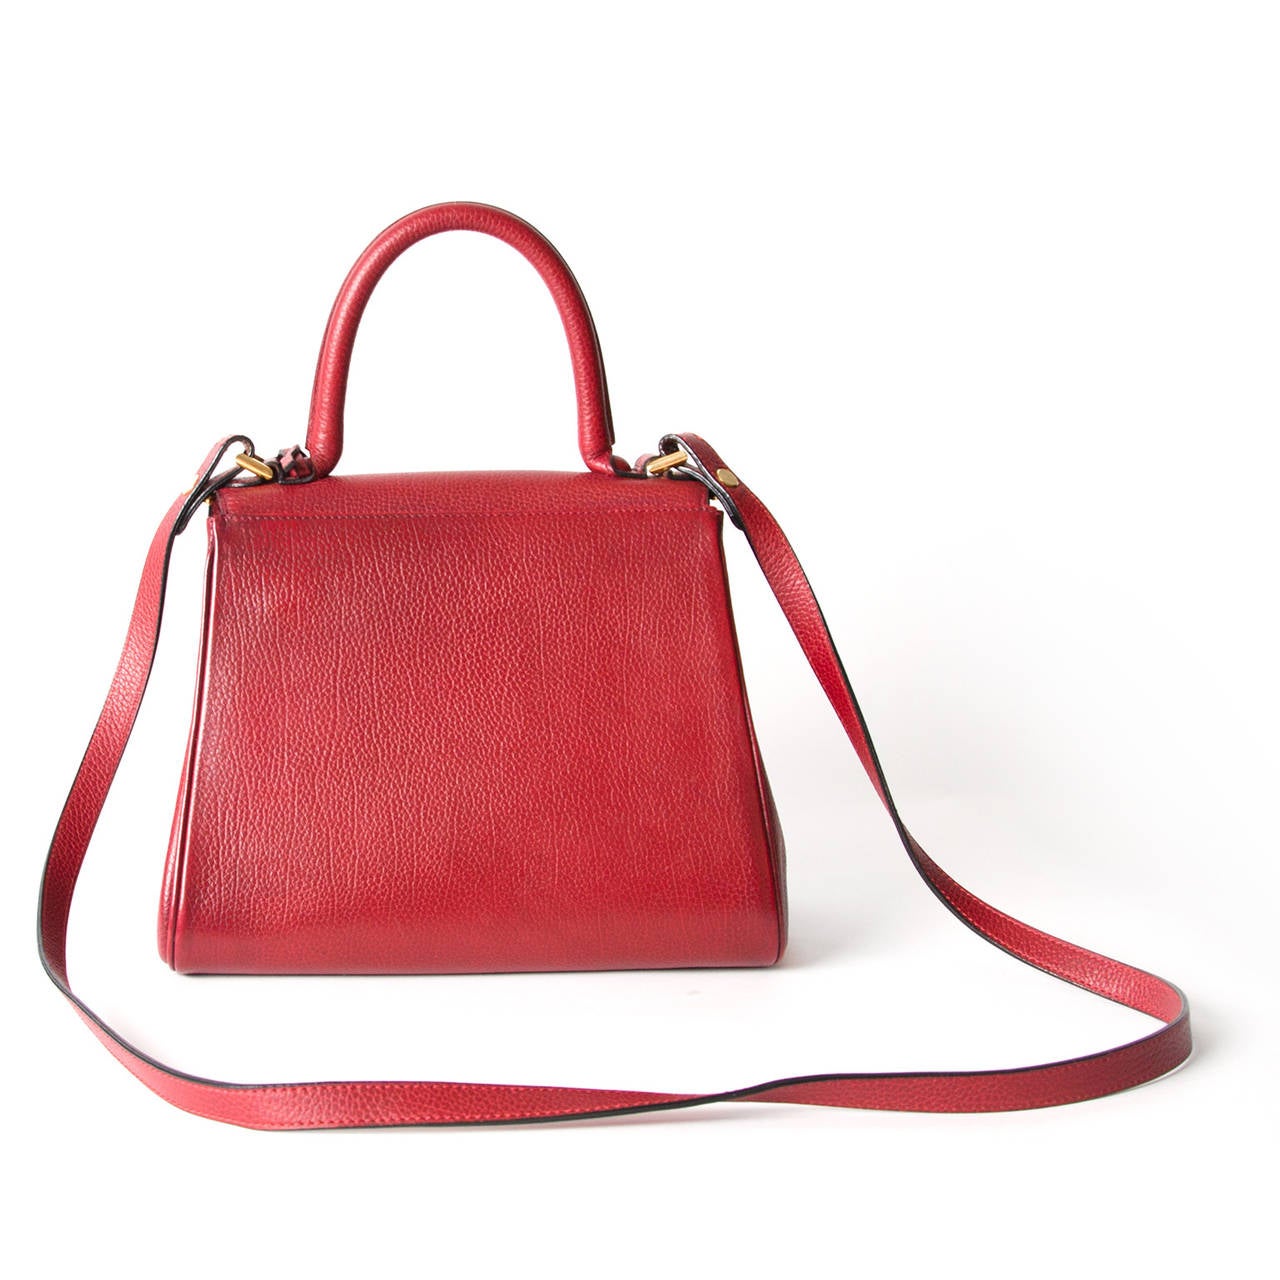 Delvaux Deep Red Brillant PM with golden hardware

The Delvaux Brillant is a bag that every fashionable woman should have,  a real classy and timeless model.

This bag will make your outfit complete!

The bag has an adjustable and detachable